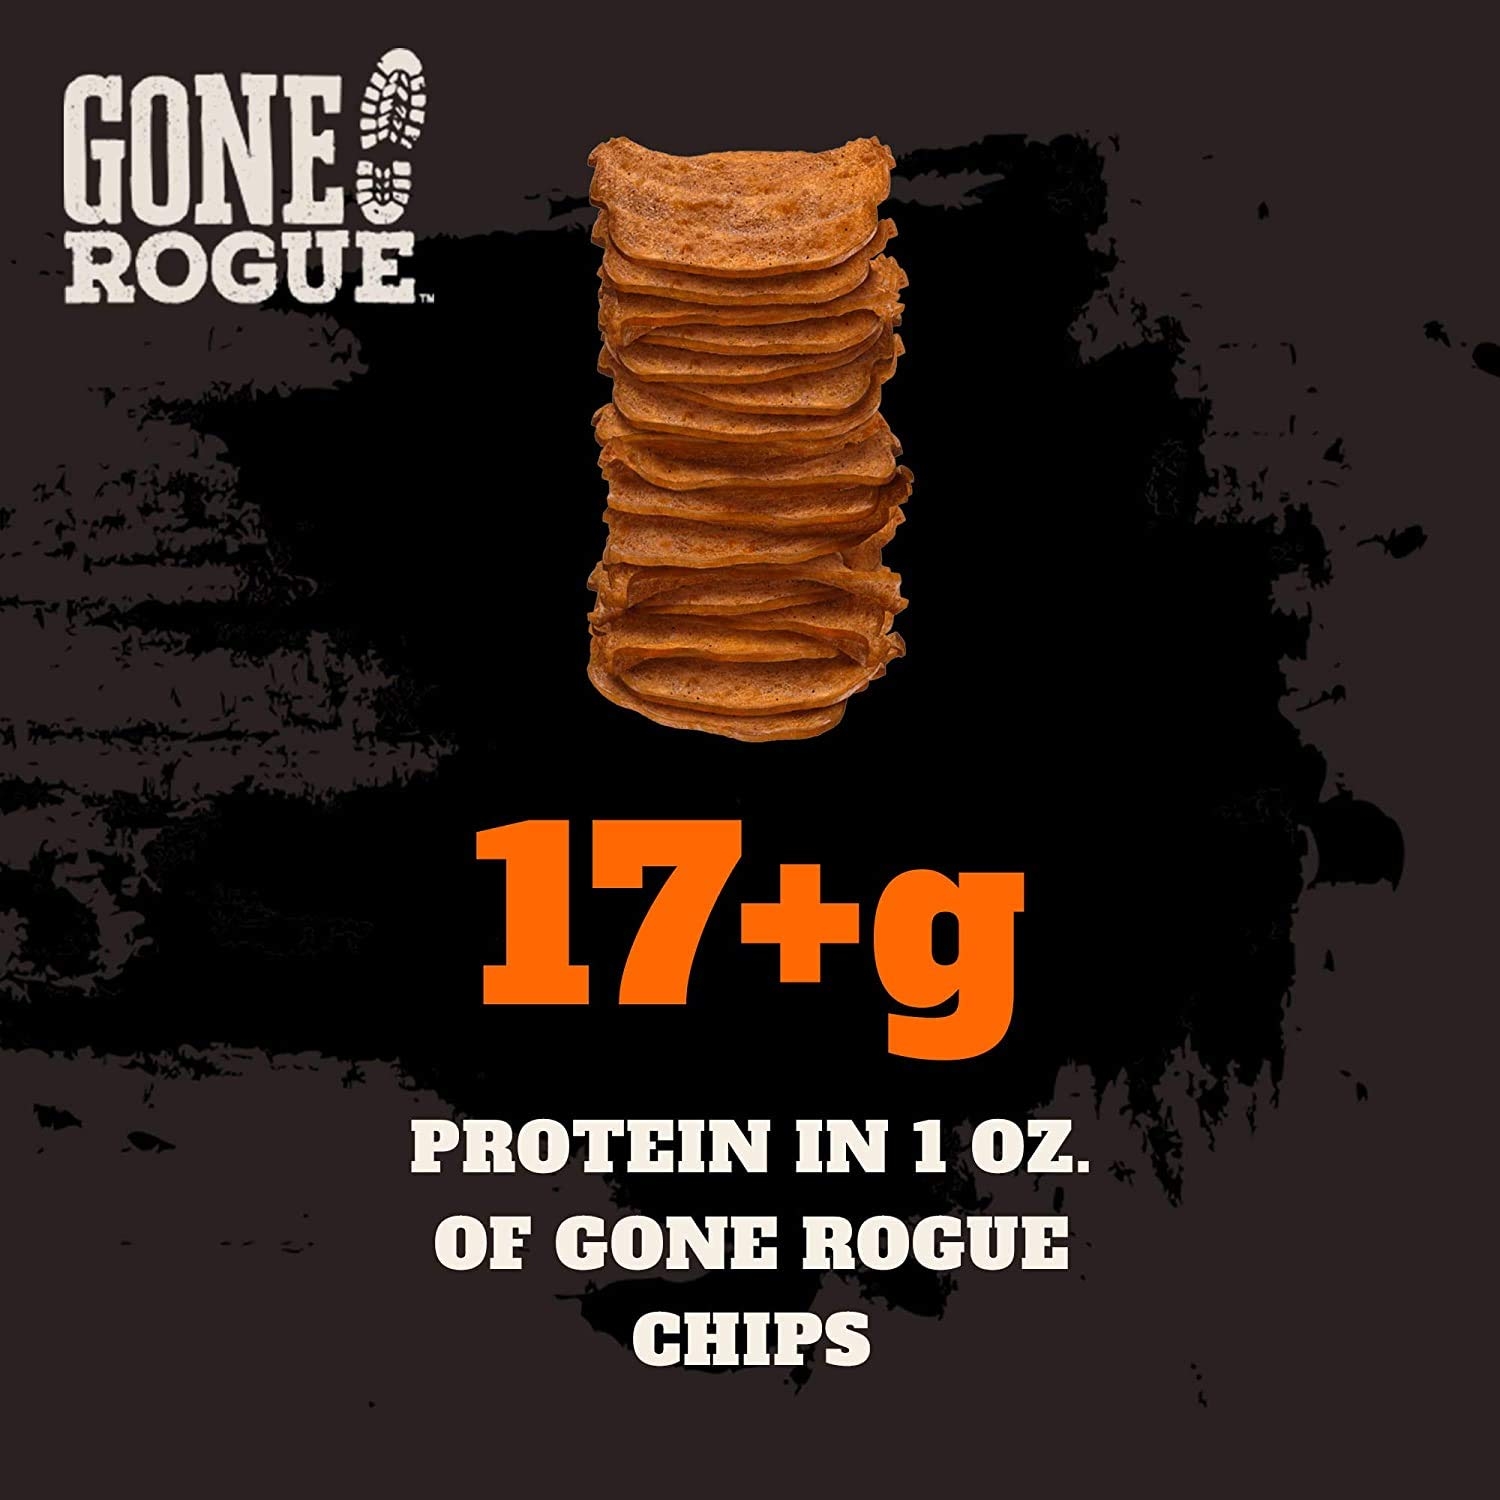 Gone Rogue High Protein Chips, Low Carb, Gluten Free, Keto Friendly Snacks - Variety Pack, 4 pack, 4 Flavors: Ranch Style Chicken, Taco Style Chicken, Chicken Bacon & Buffalo Style Chicken